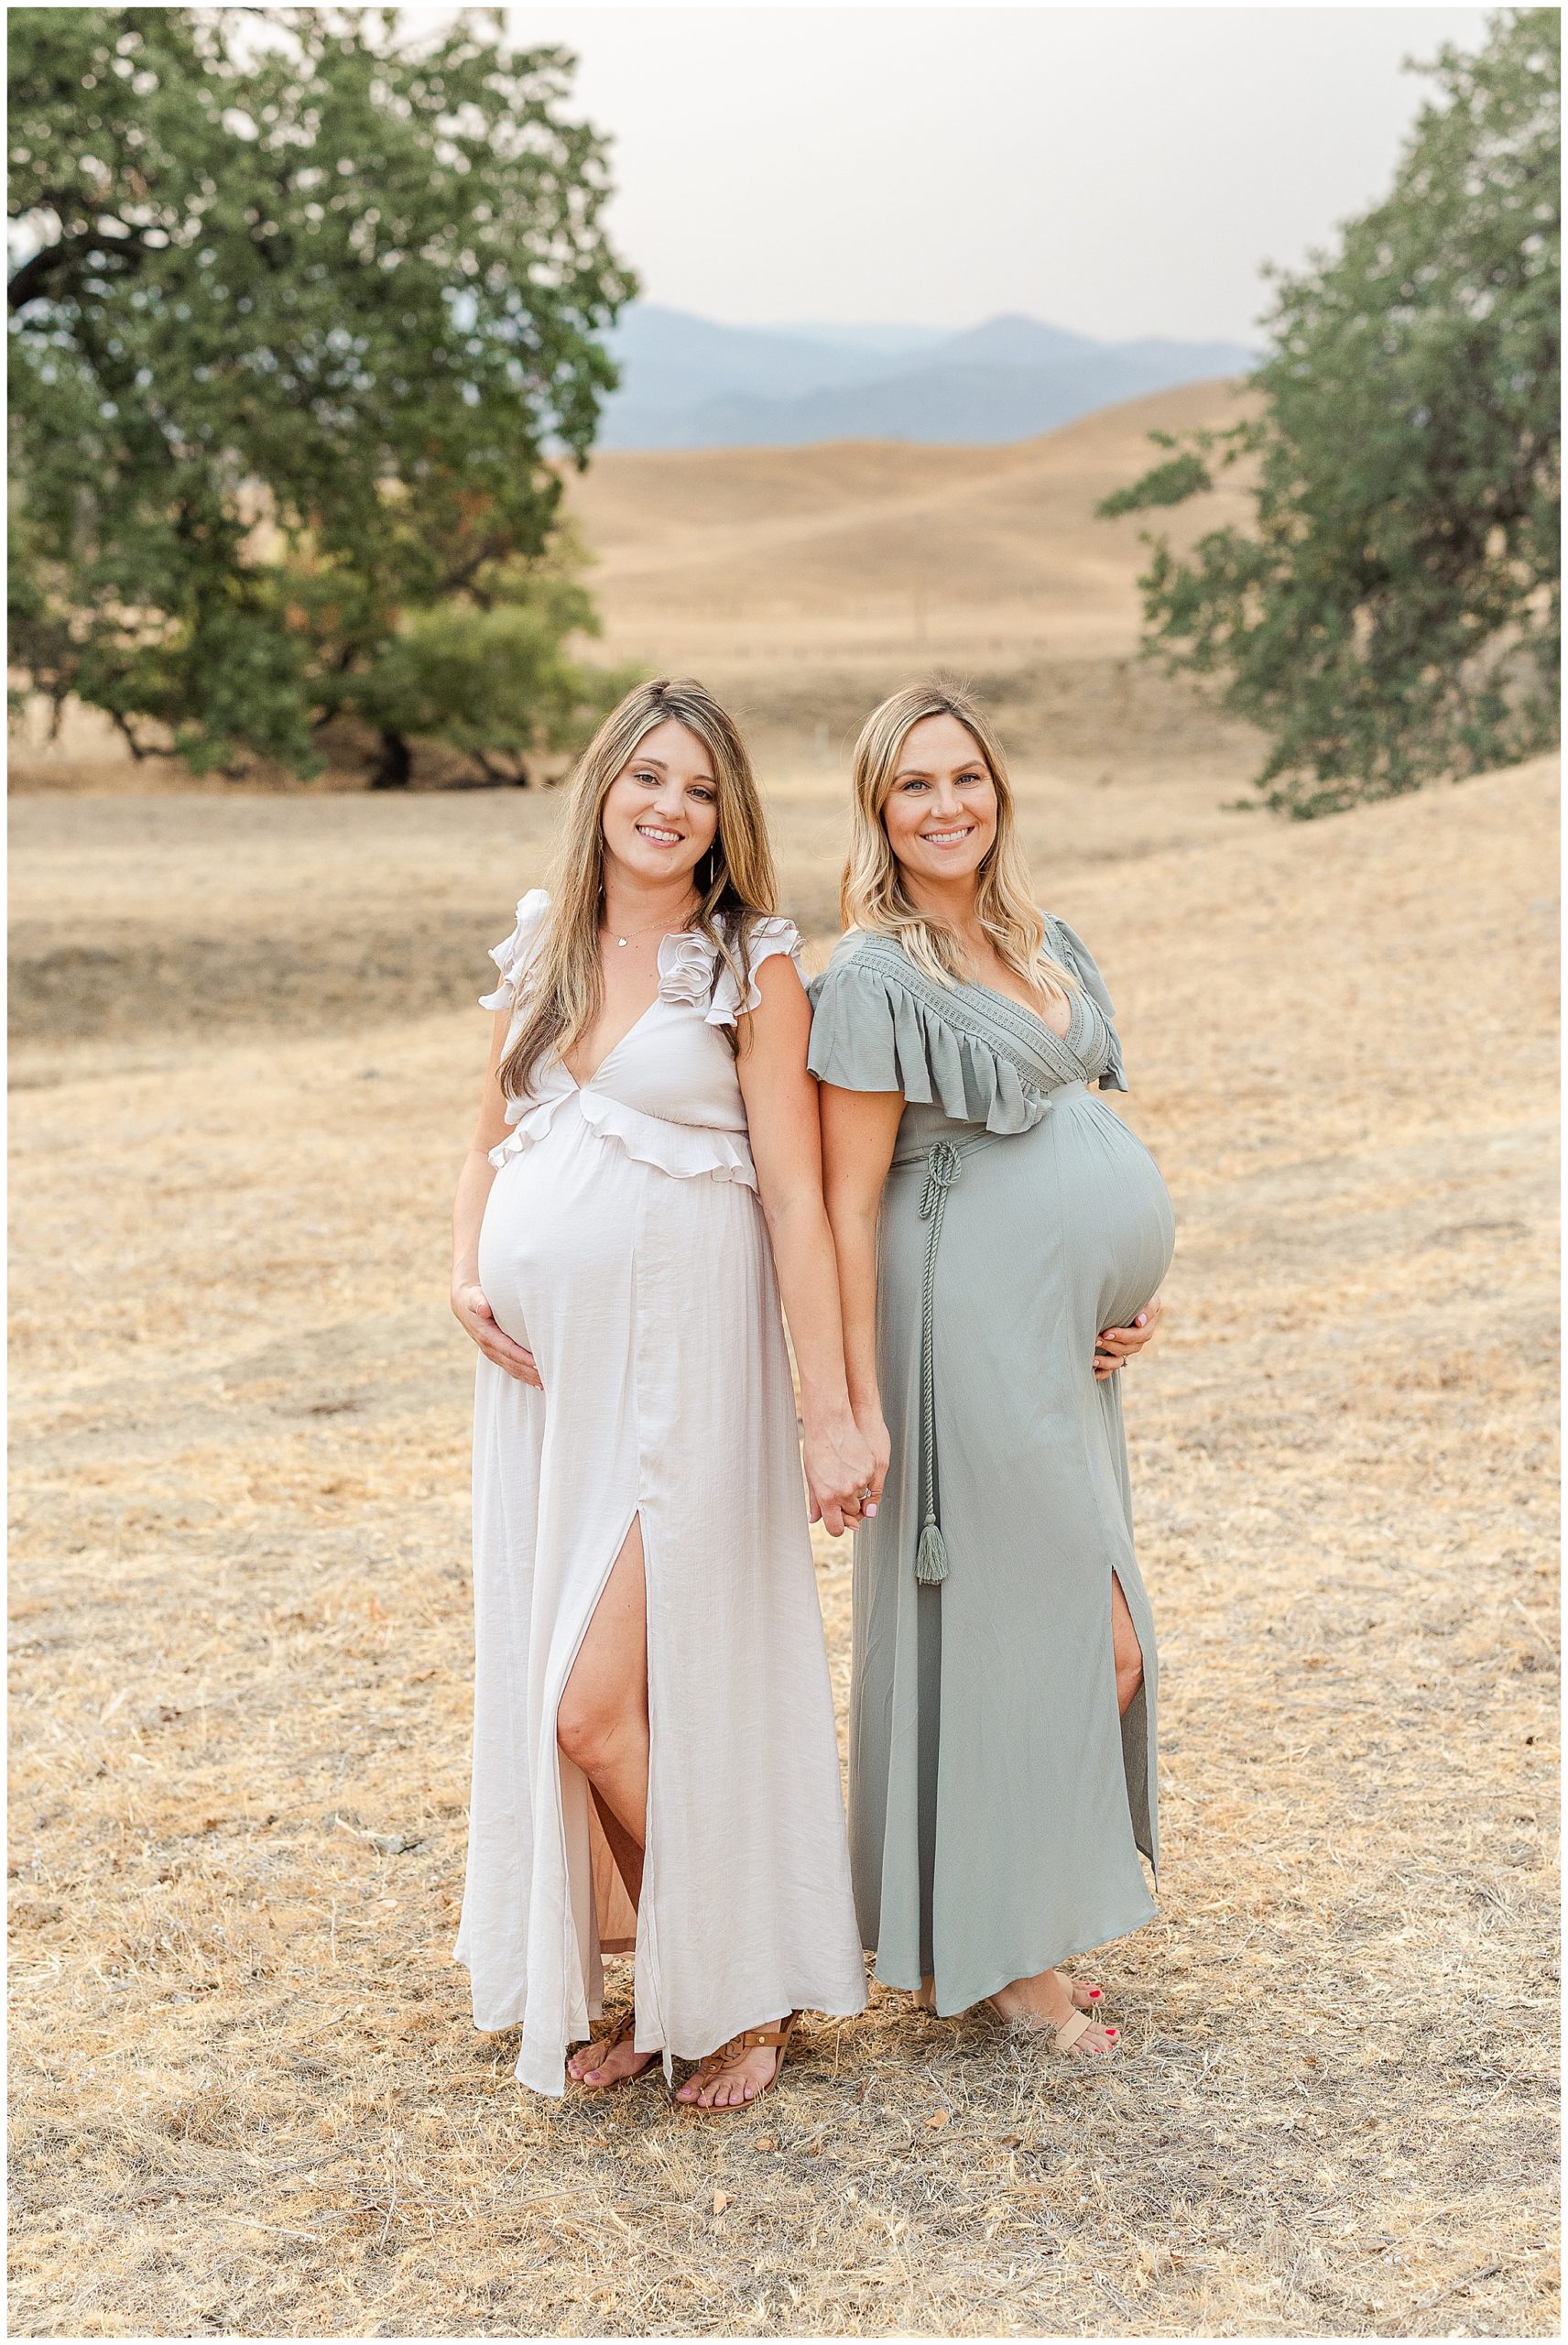 Friends Pregnant Together in a Country Maternity Session | Jessica + Kristine